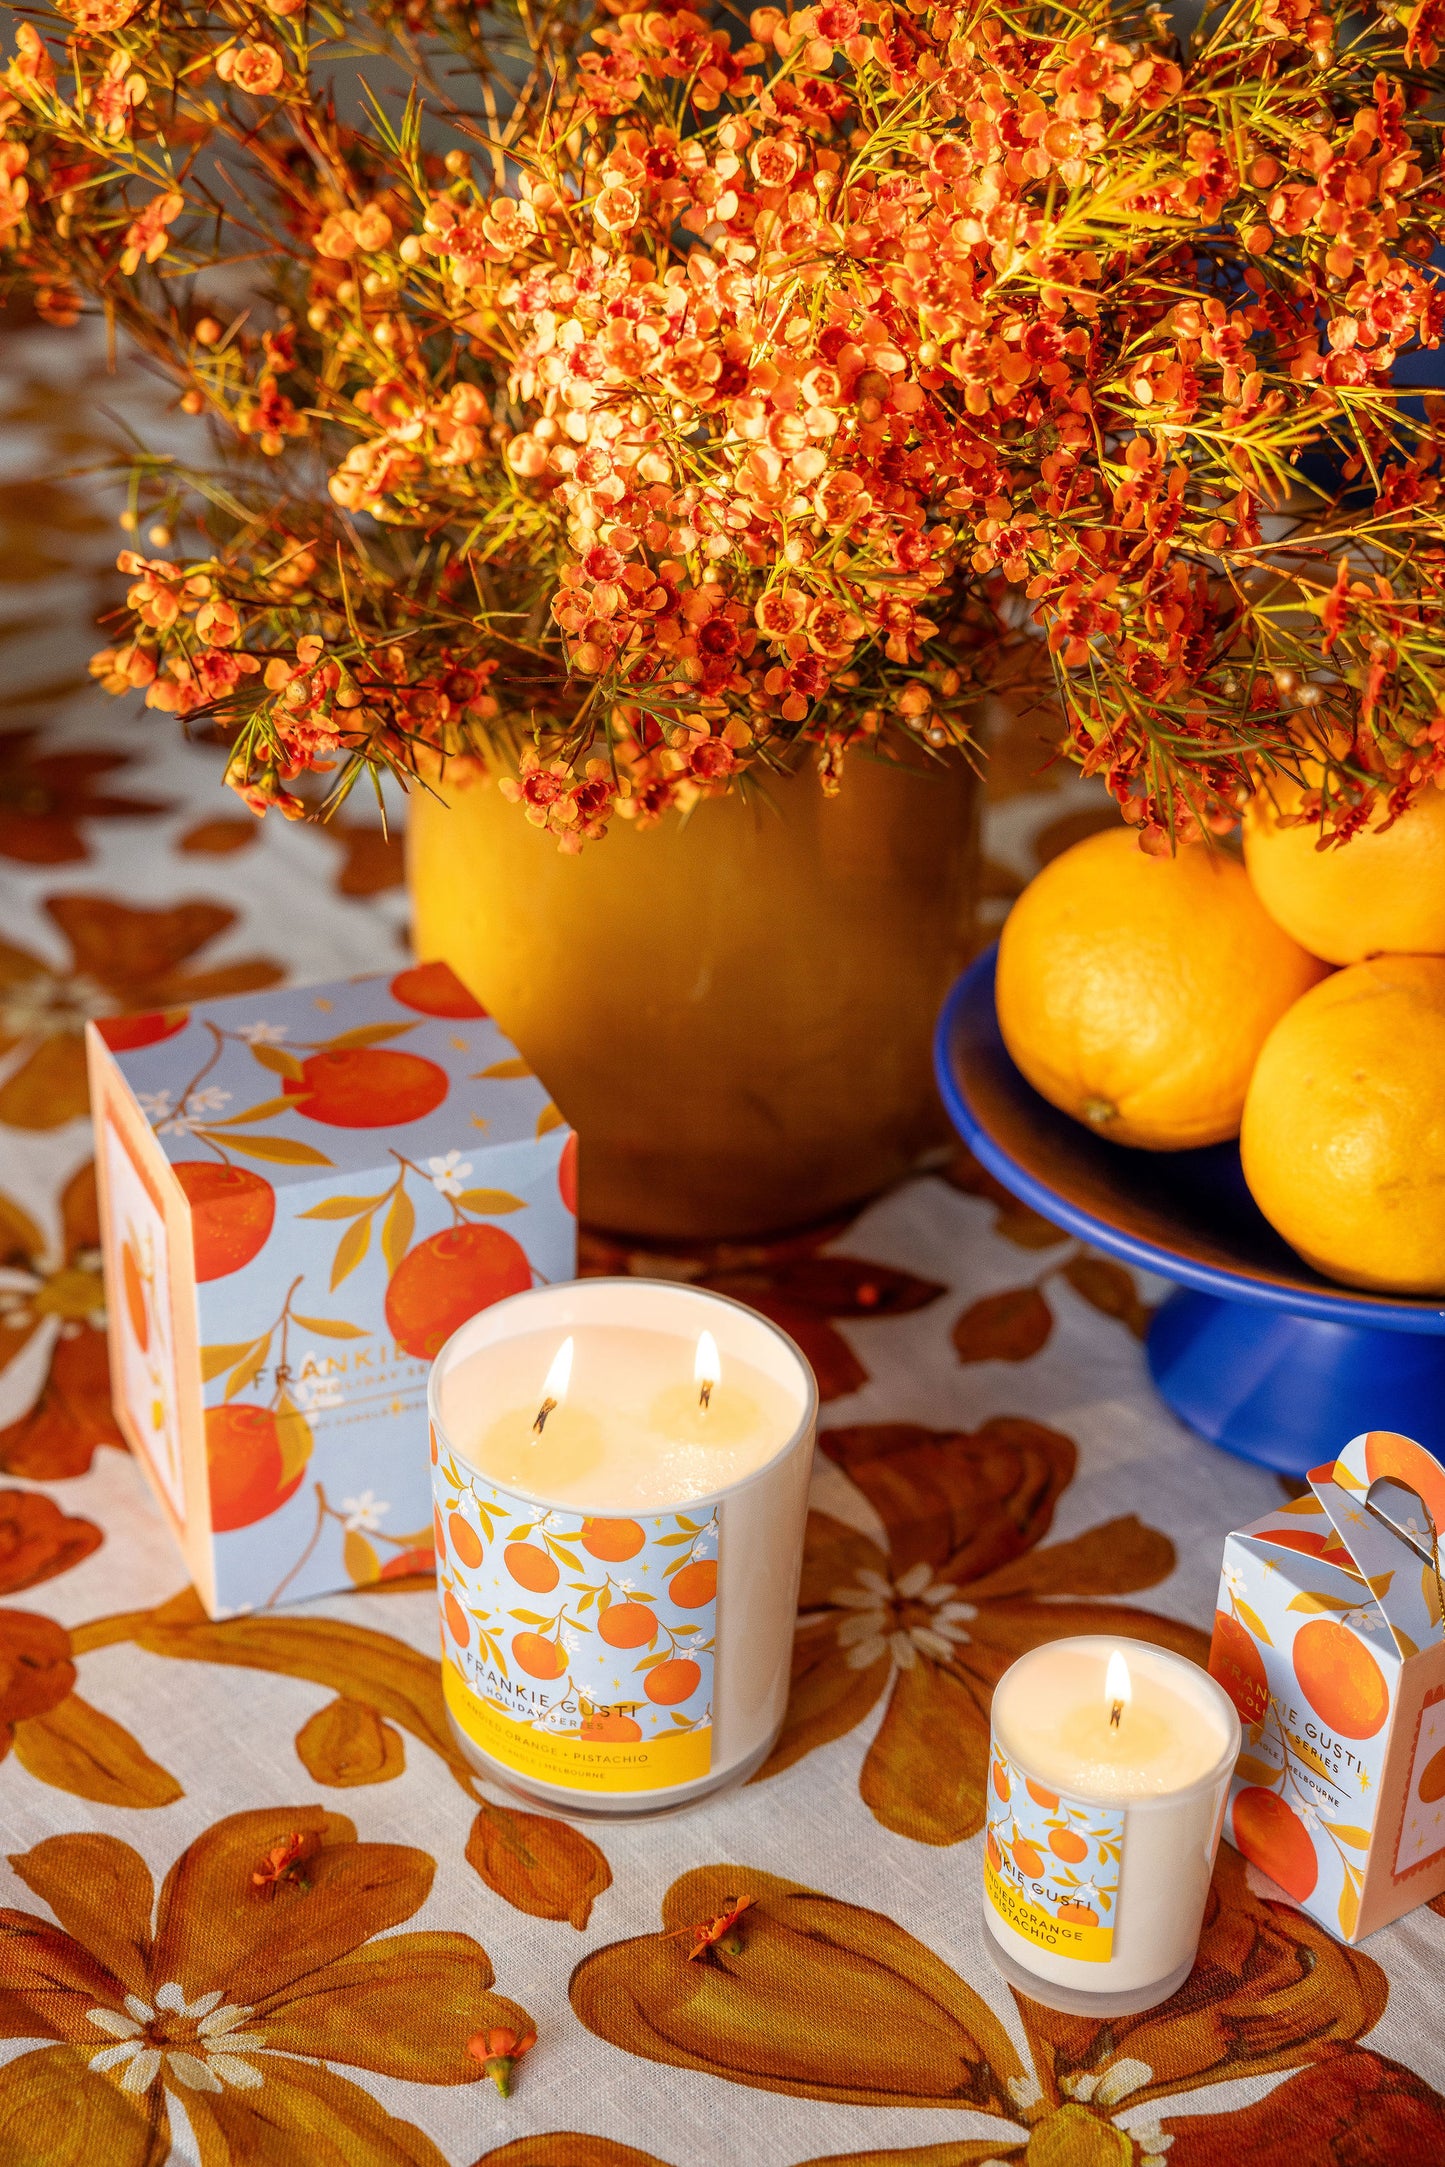 Holiday Candle - Candied Orange & Pistachio